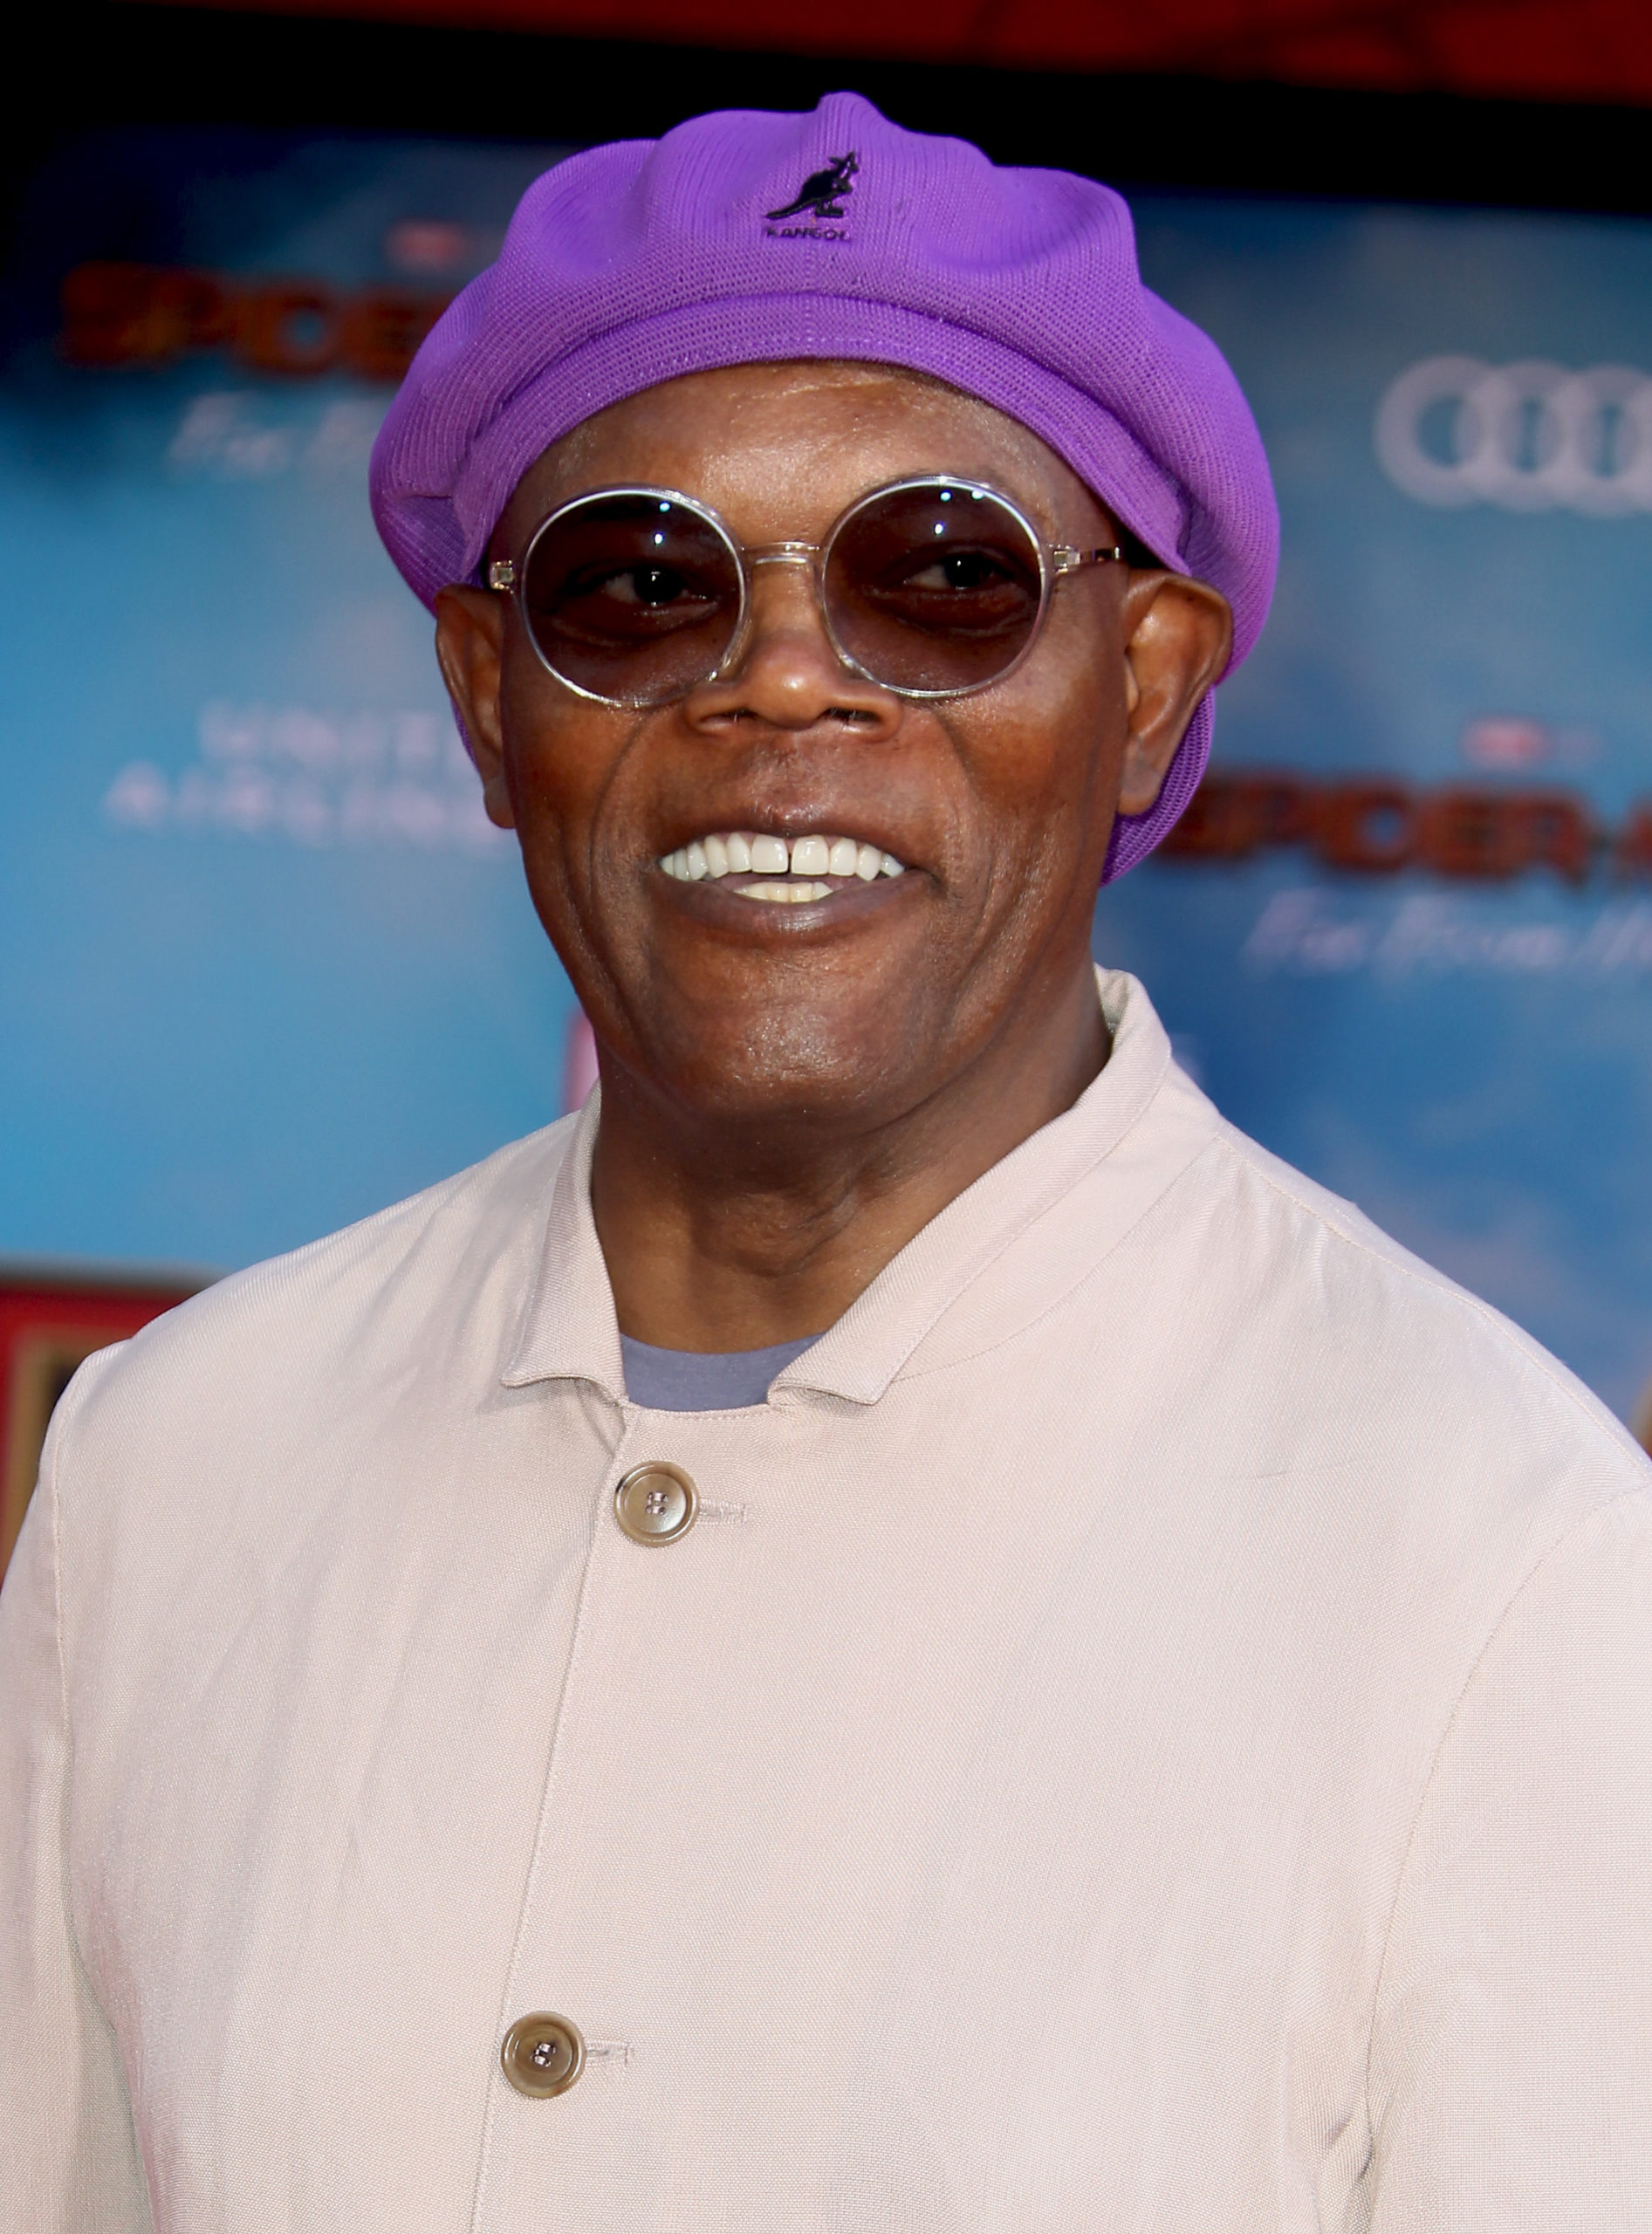 Samuel L Jackson Was Expelled From College During Civil Rights Movement Protests